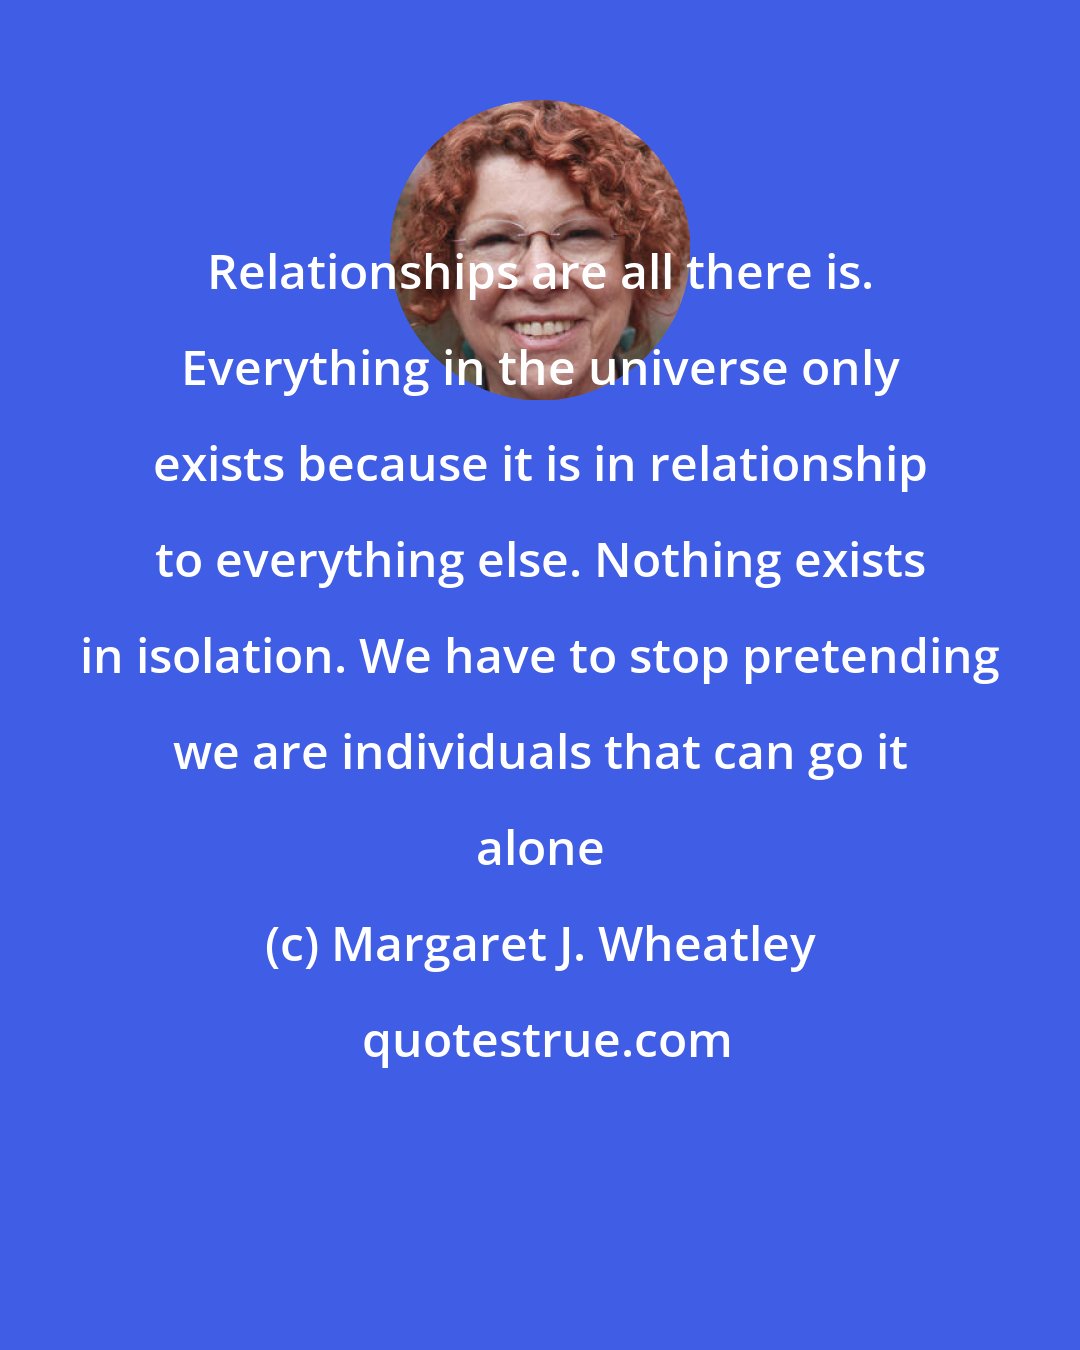 Margaret J. Wheatley: Relationships are all there is. Everything in the universe only exists because it is in relationship to everything else. Nothing exists in isolation. We have to stop pretending we are individuals that can go it alone